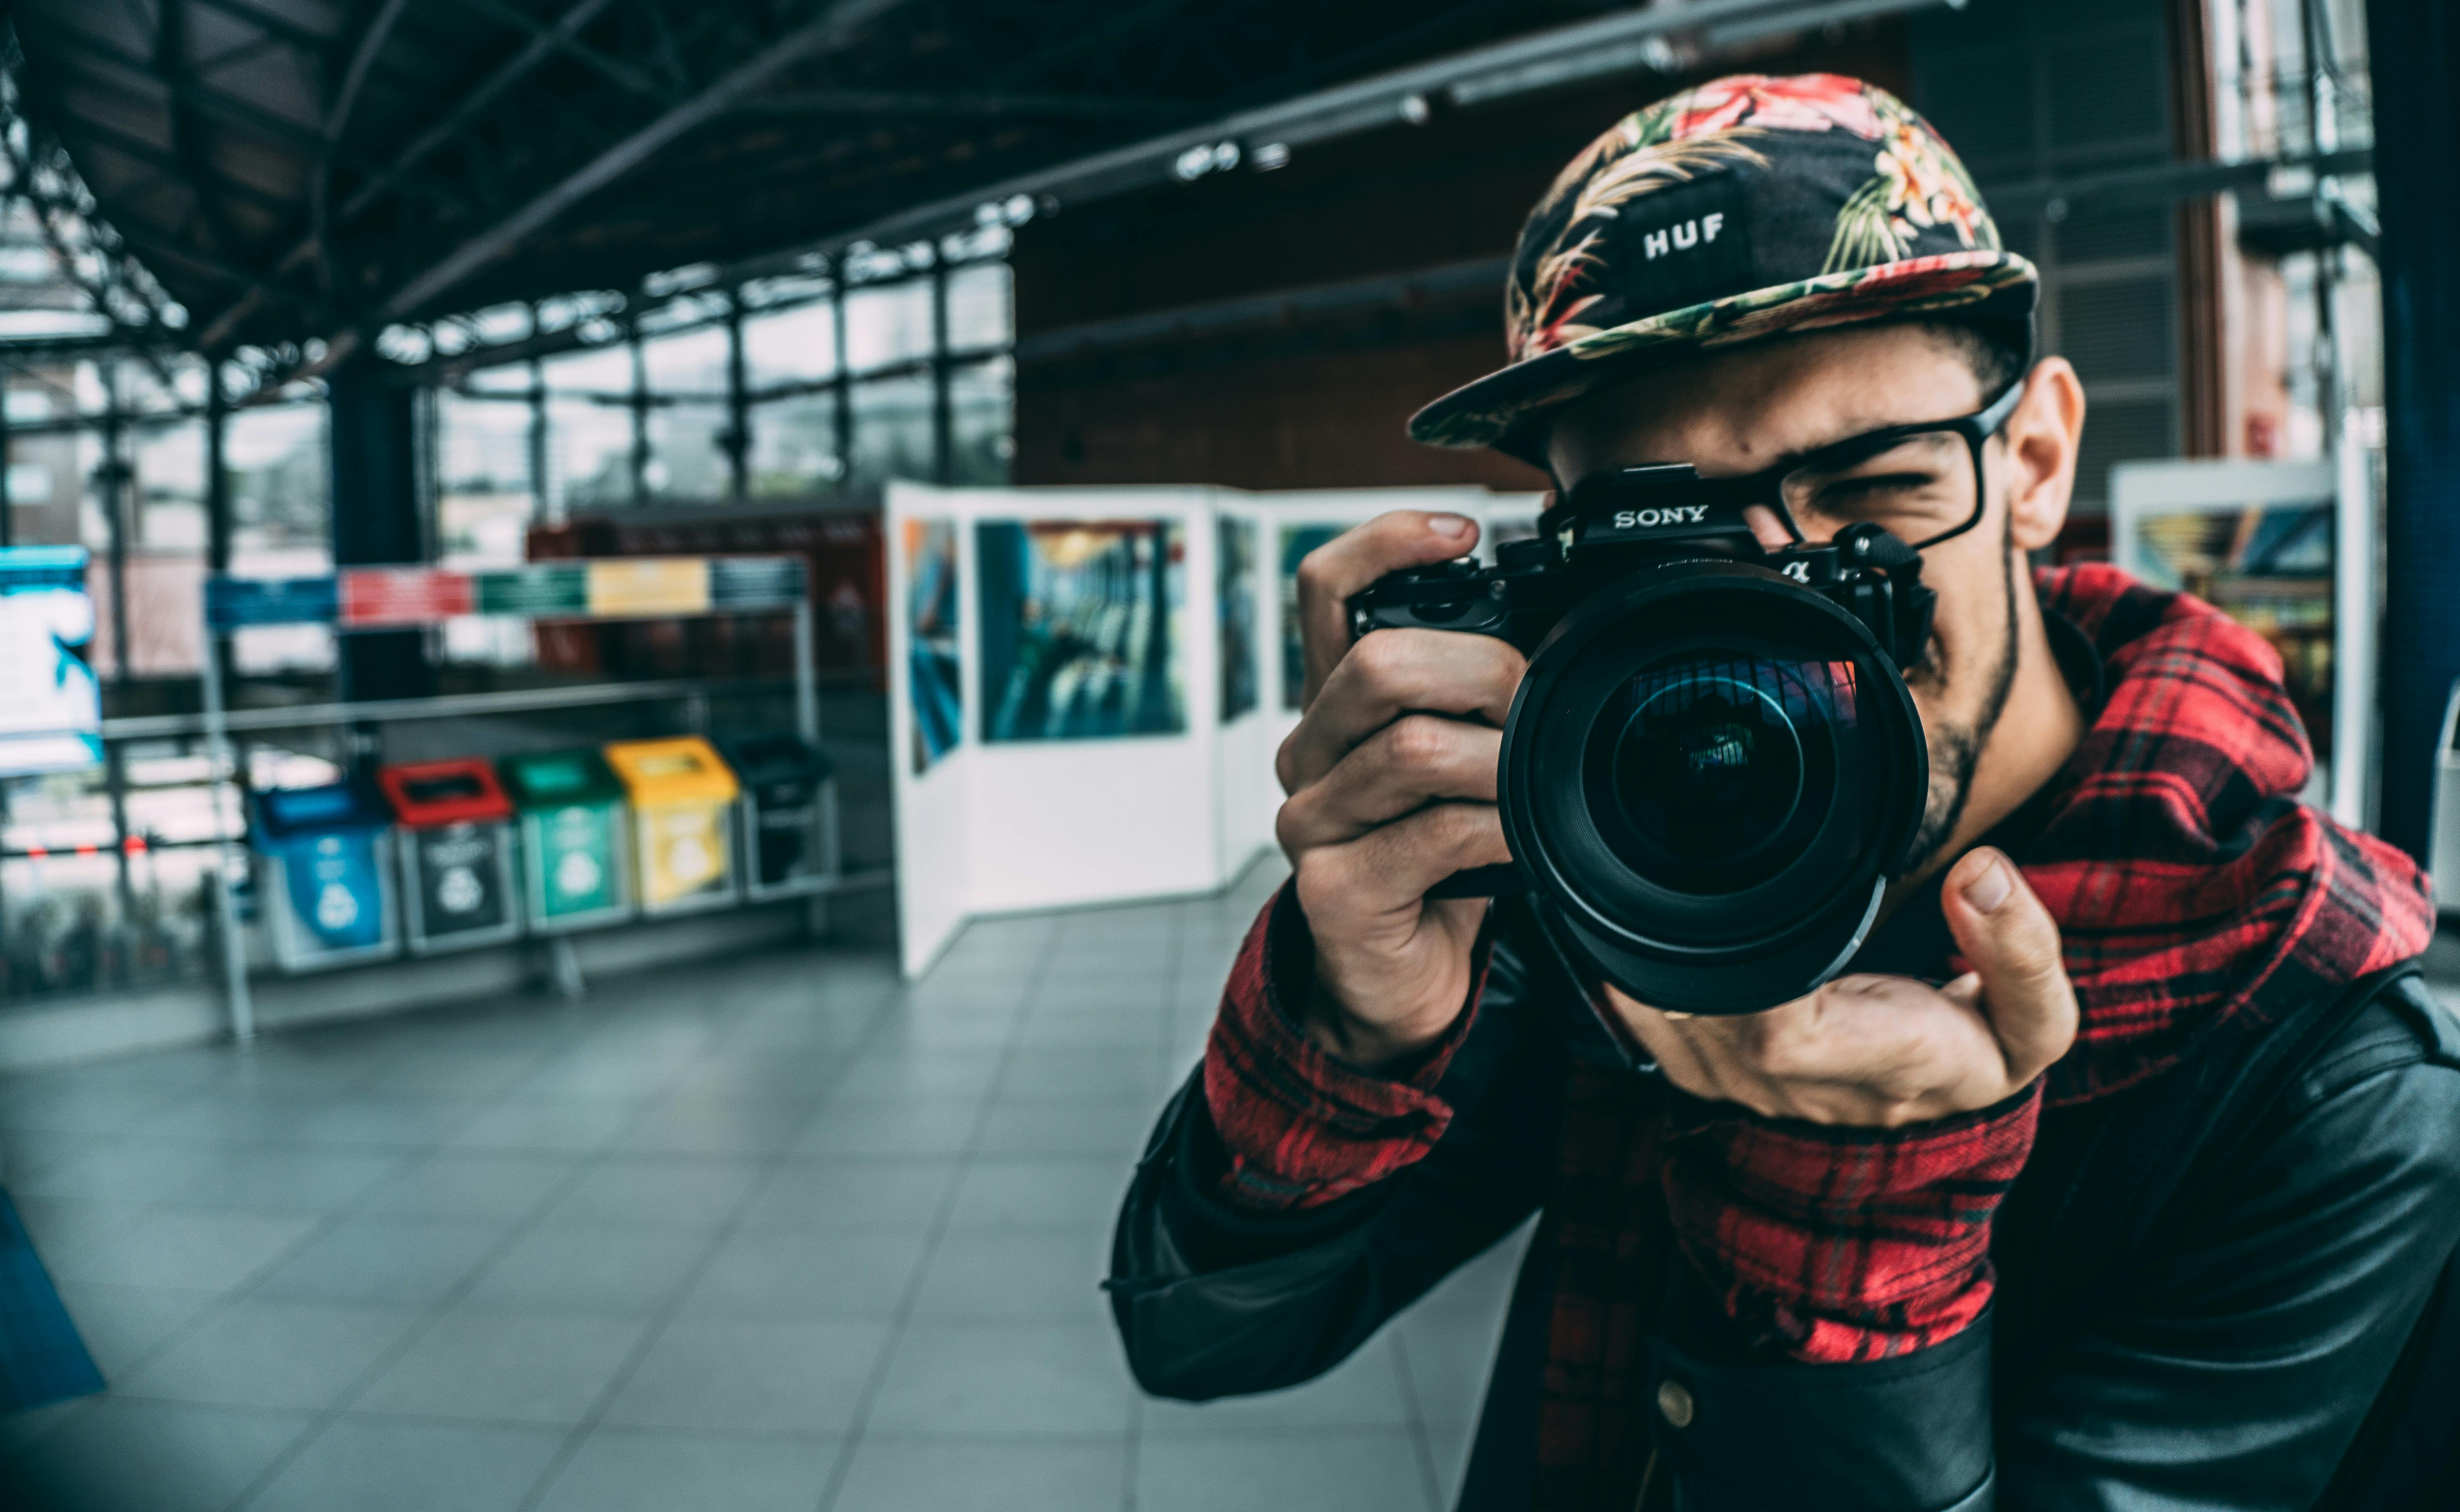 A male photographer | Source: Pexels